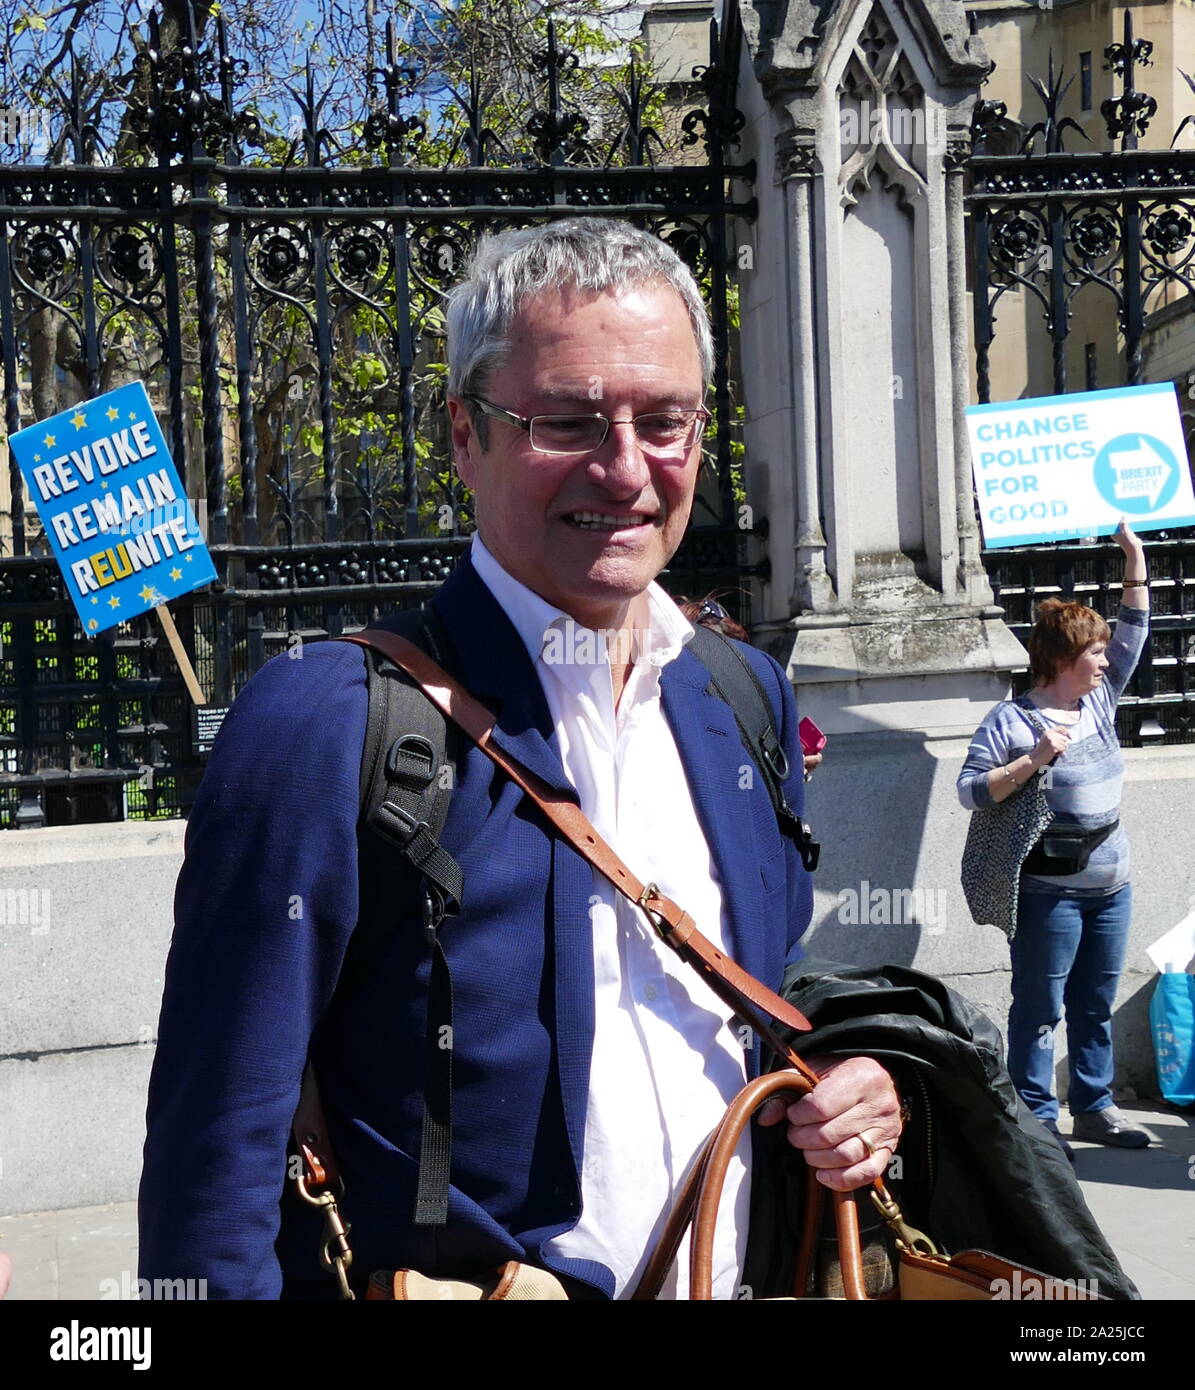 Gavin Esler, Scottish journalist, television presenter and author. candidate for Change UK in London at the 2019 European Parliament election. Stock Photo